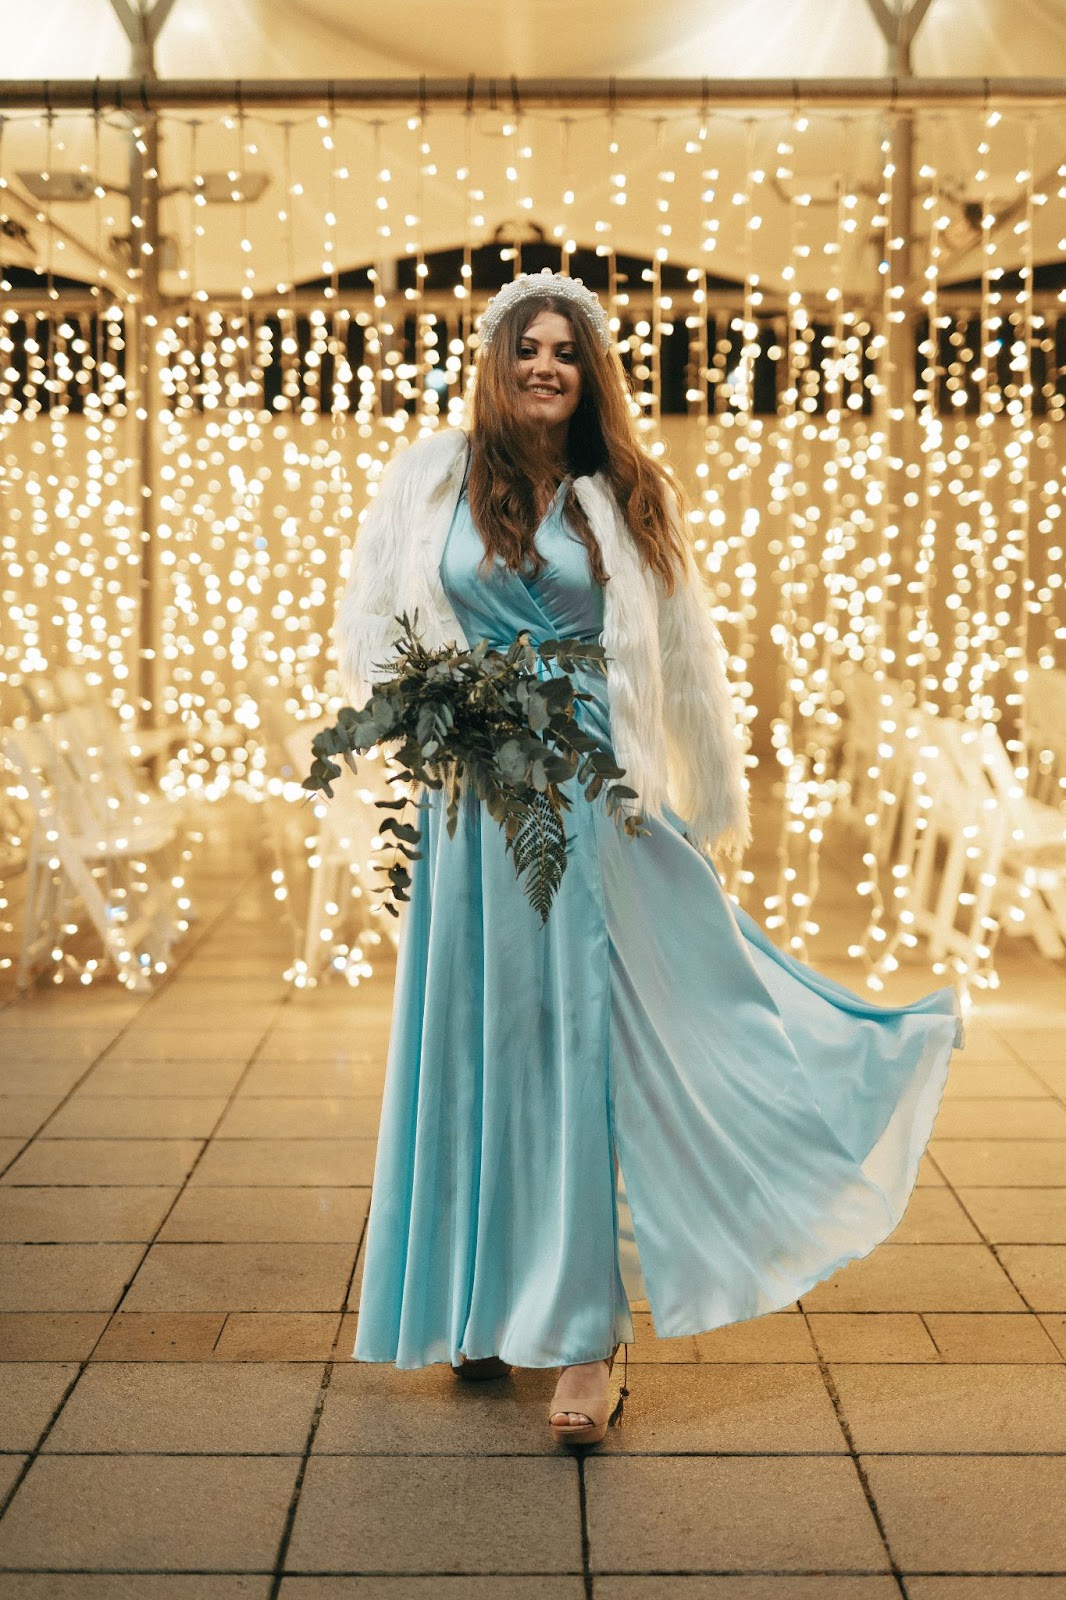 Bride stood in blue dress holding a bouquet